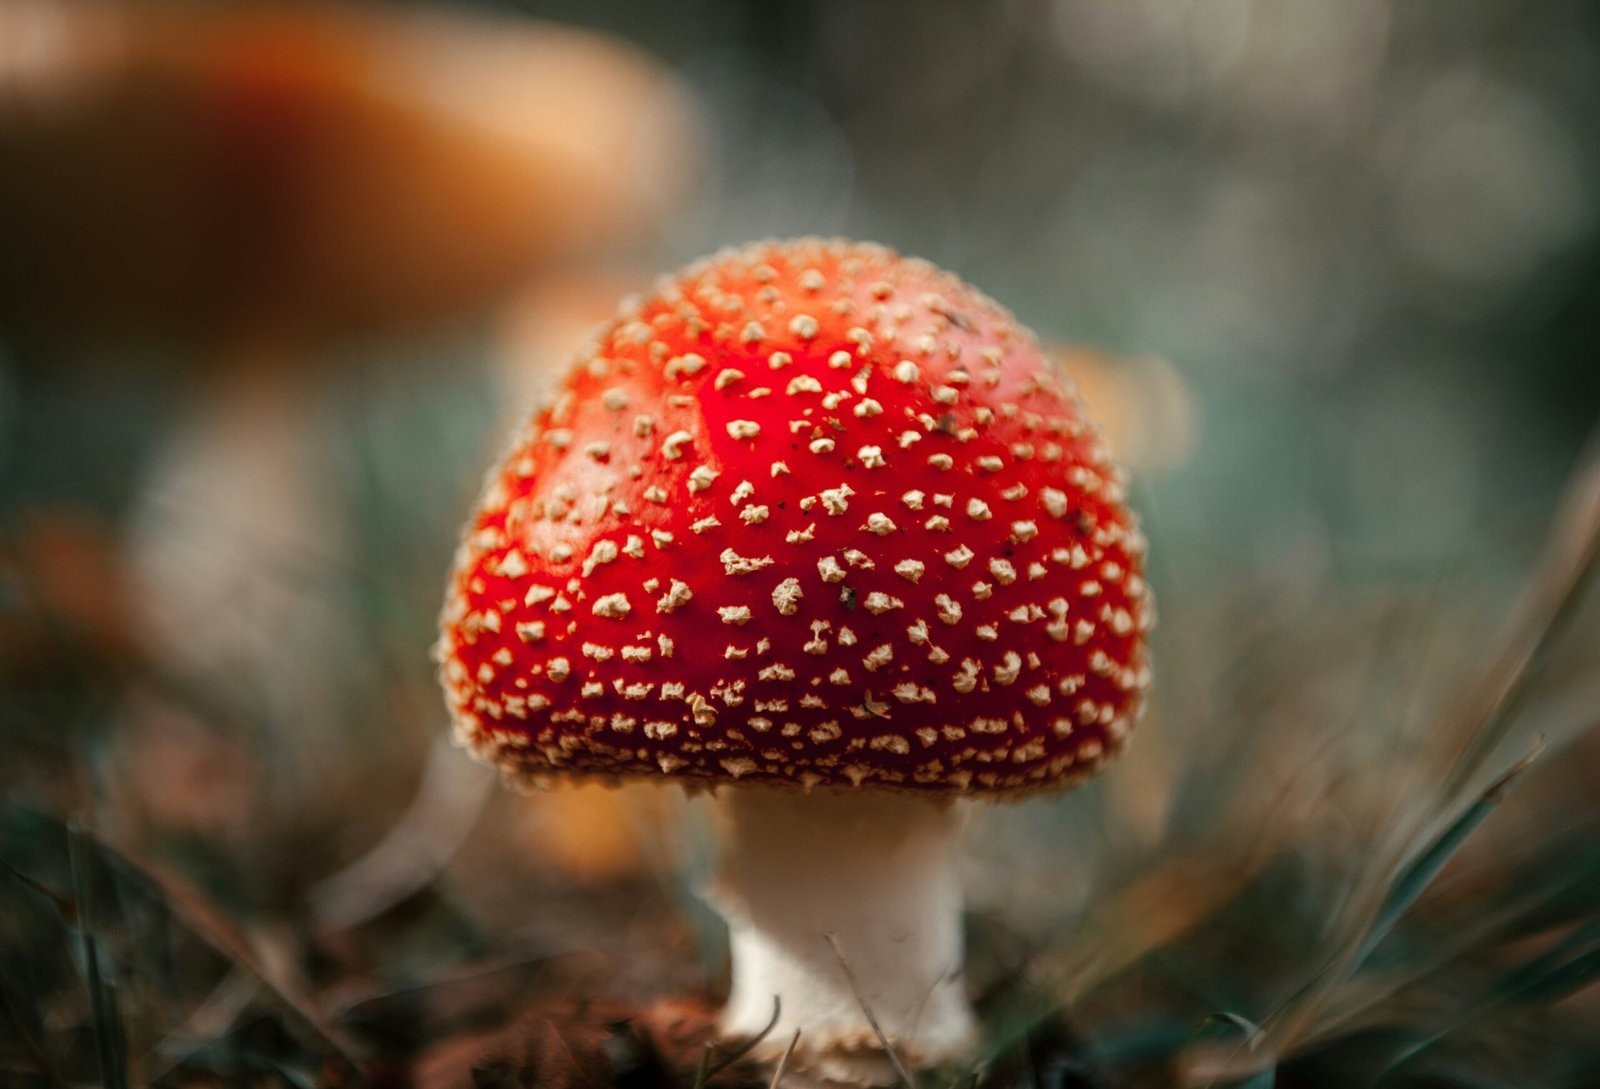 Unregulated sales of a toxic and hallucinogenic mushroom endanger public health says study